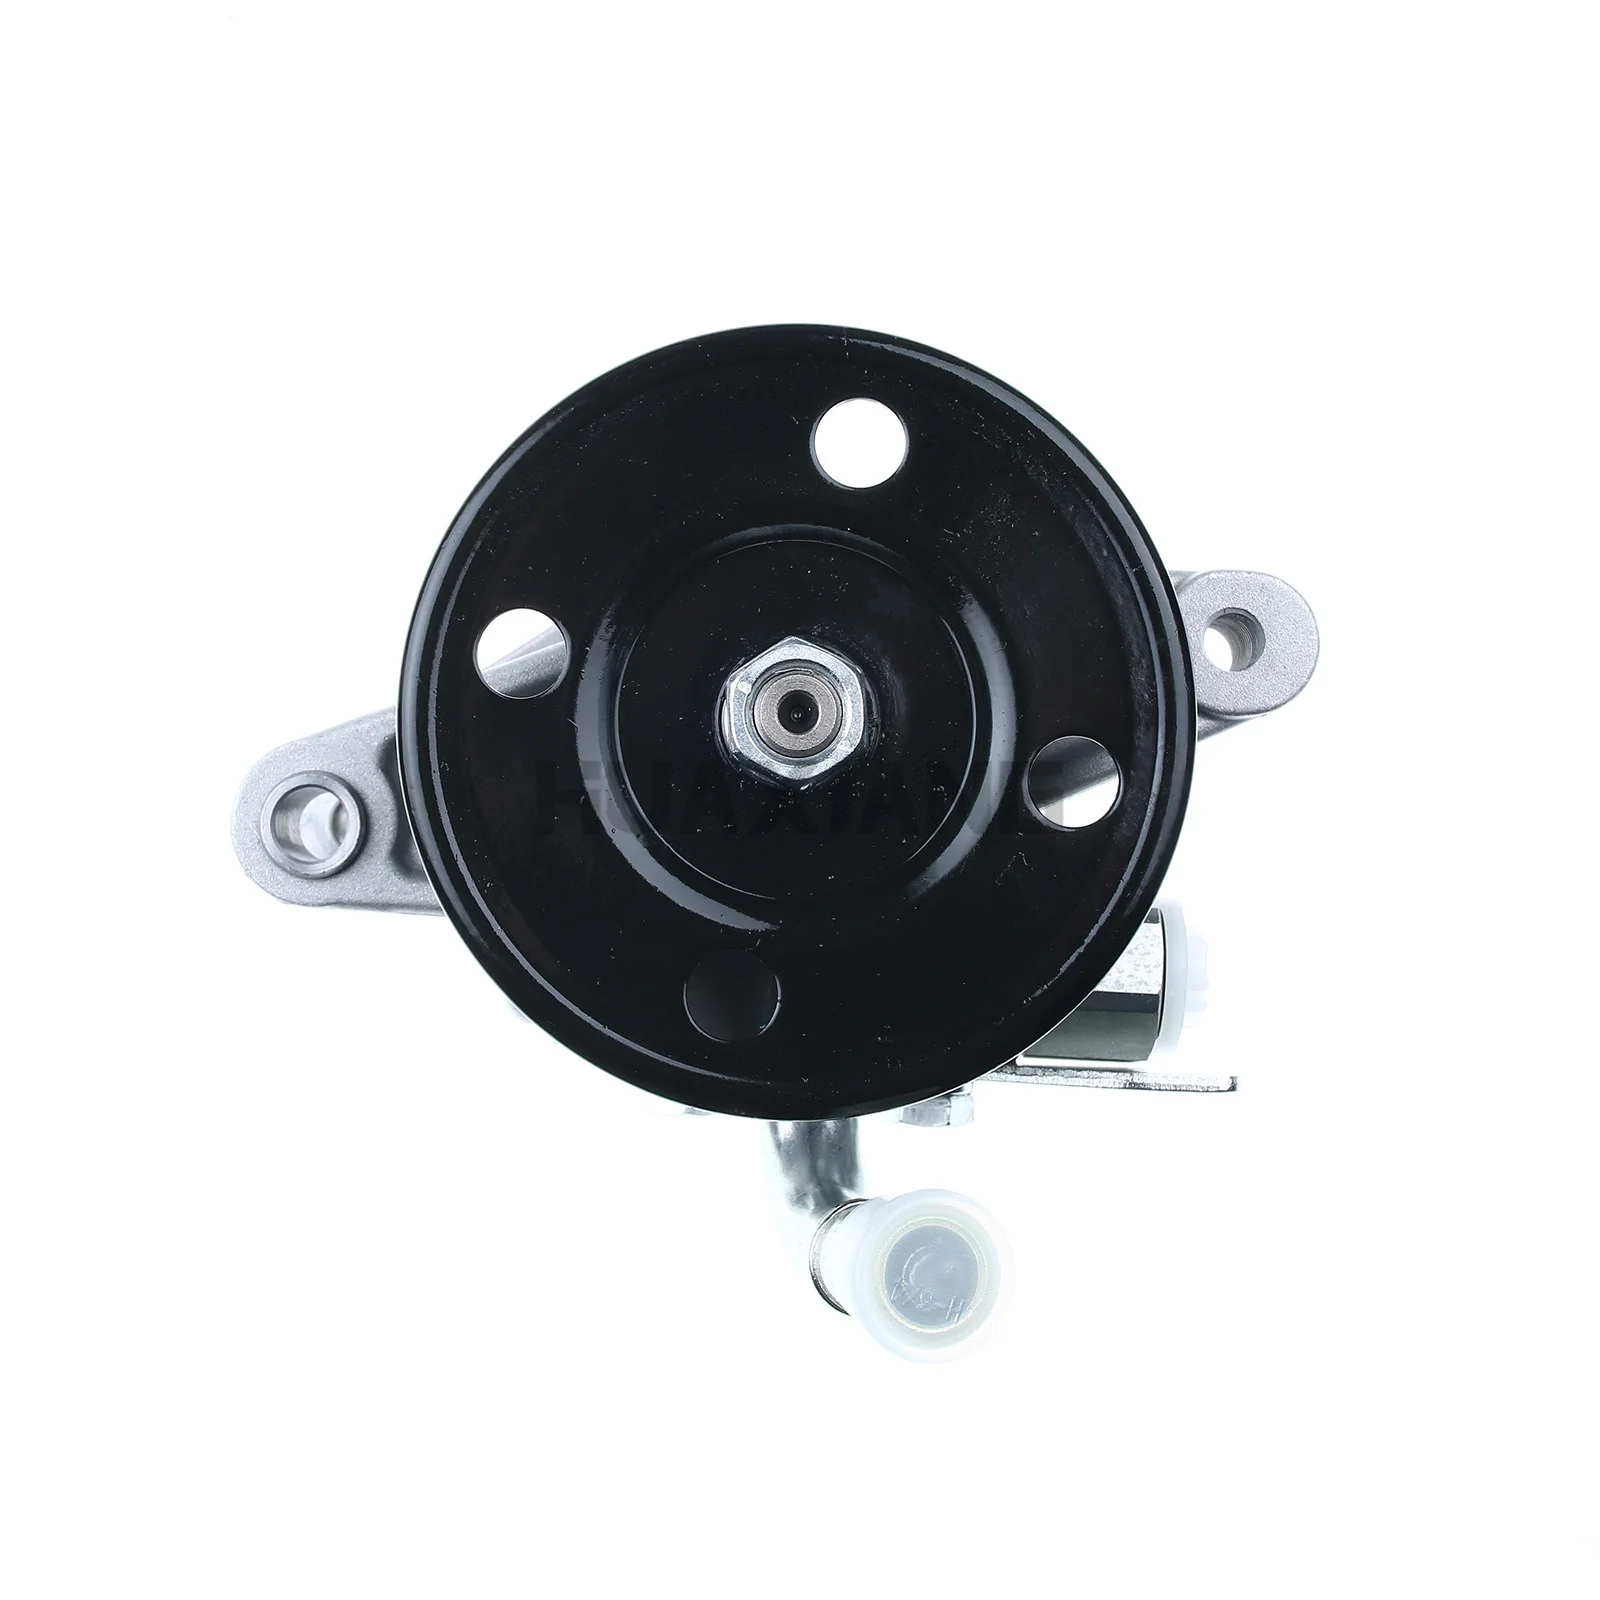 

In-stock CN US CA Power Steering Pump with Pulley for Hyundai Elantra 01-05 Tiburon 03-08 L4 2.0L 571002D100